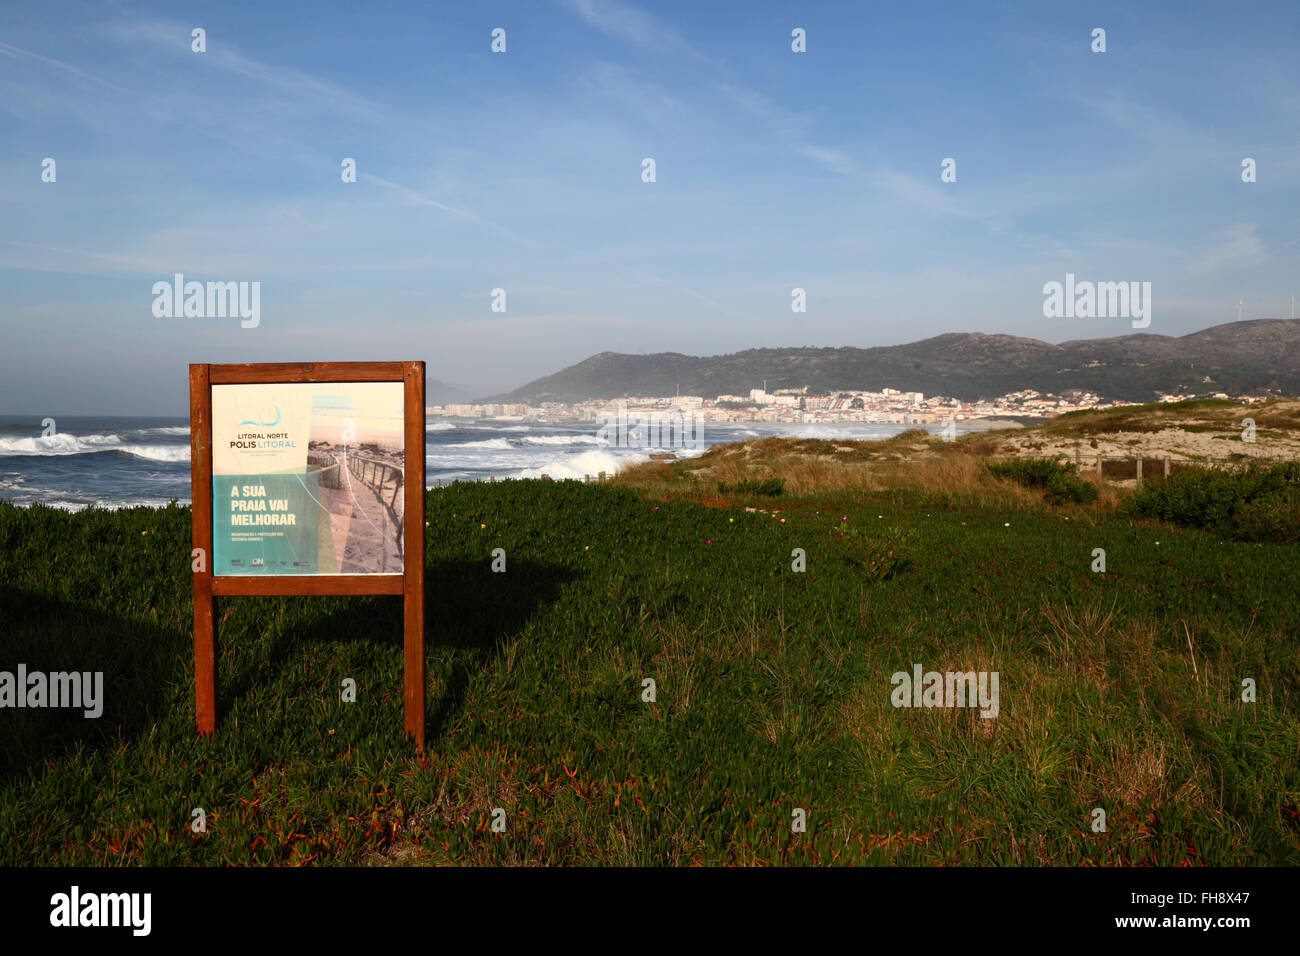 Sign for project to restore vegetation on sand dunes, Vila Praia de Ancora in background, Minho Province, northern Portugal Stock Photo